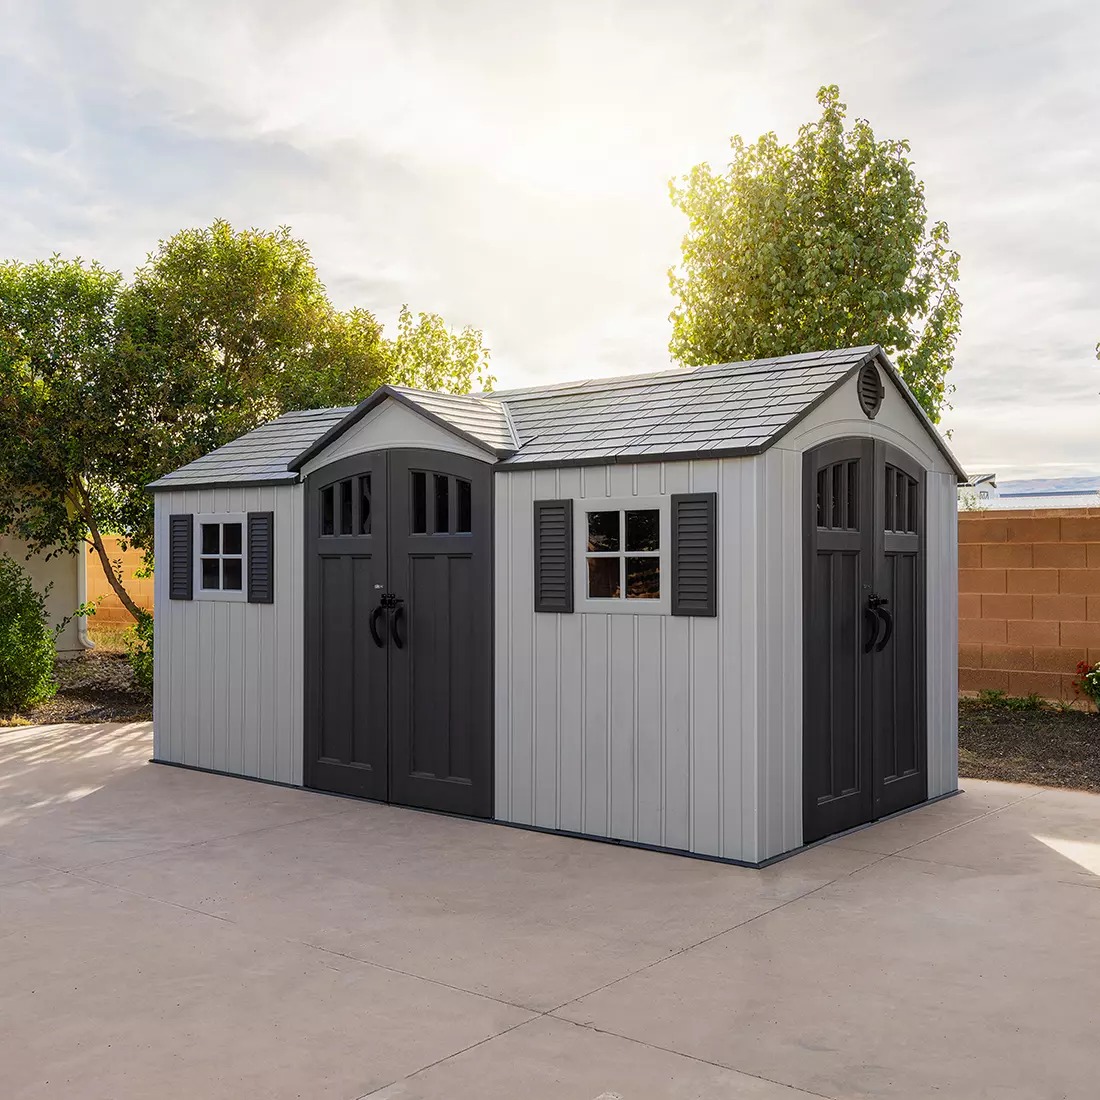 Lifetime 15 x 8 Outdoor Storage Shed1